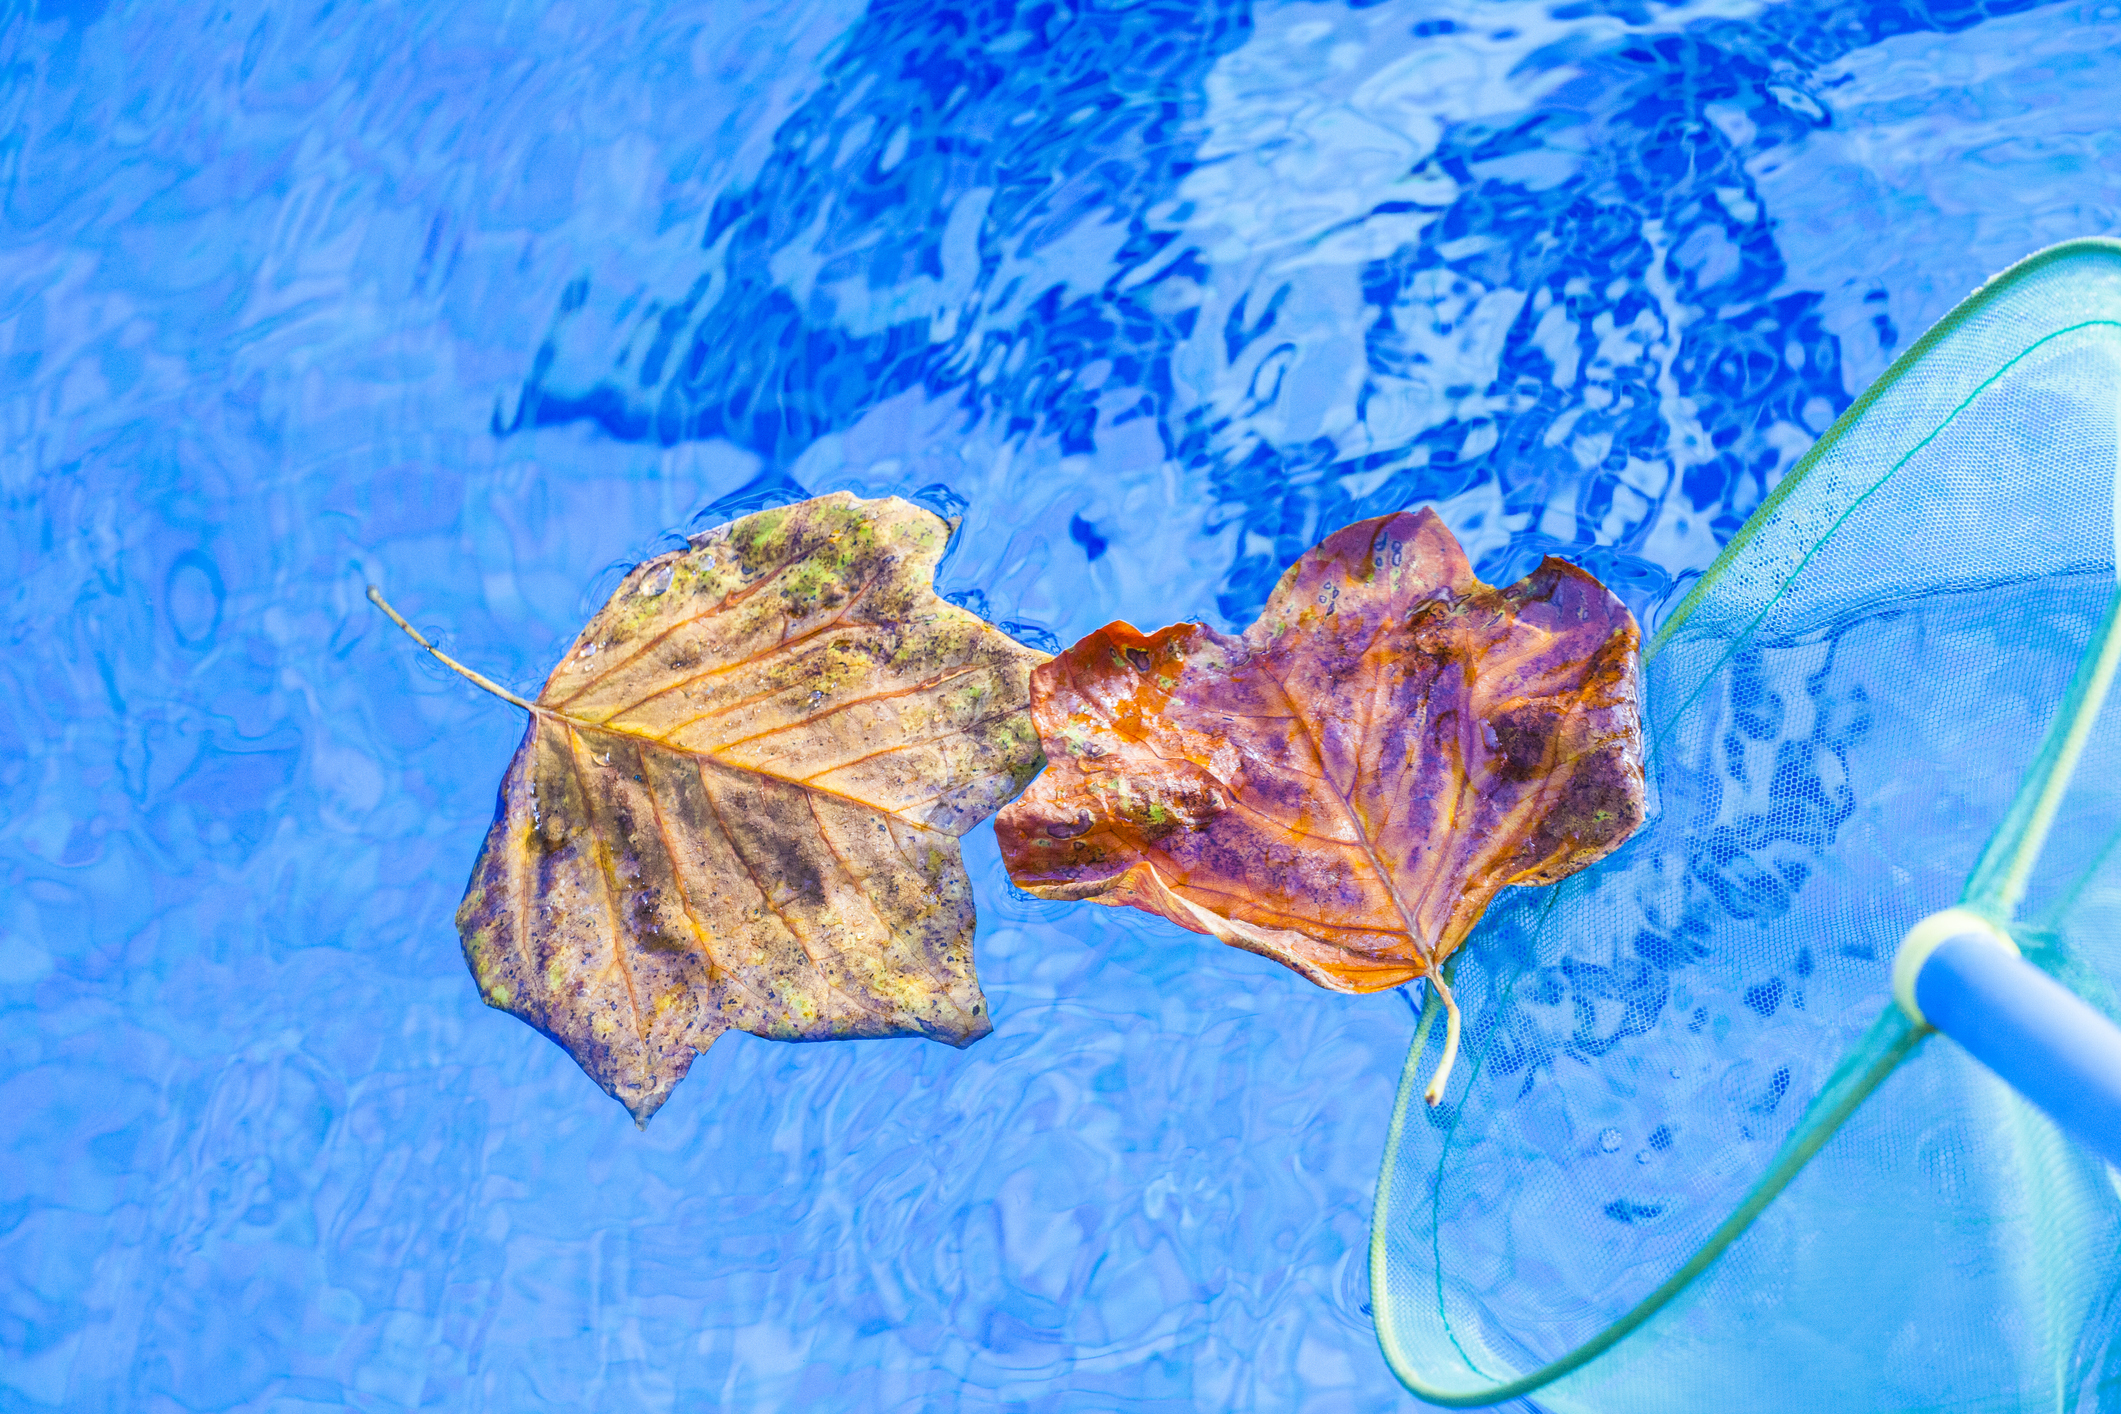 Fallen leaves being cleaned out of a pool.